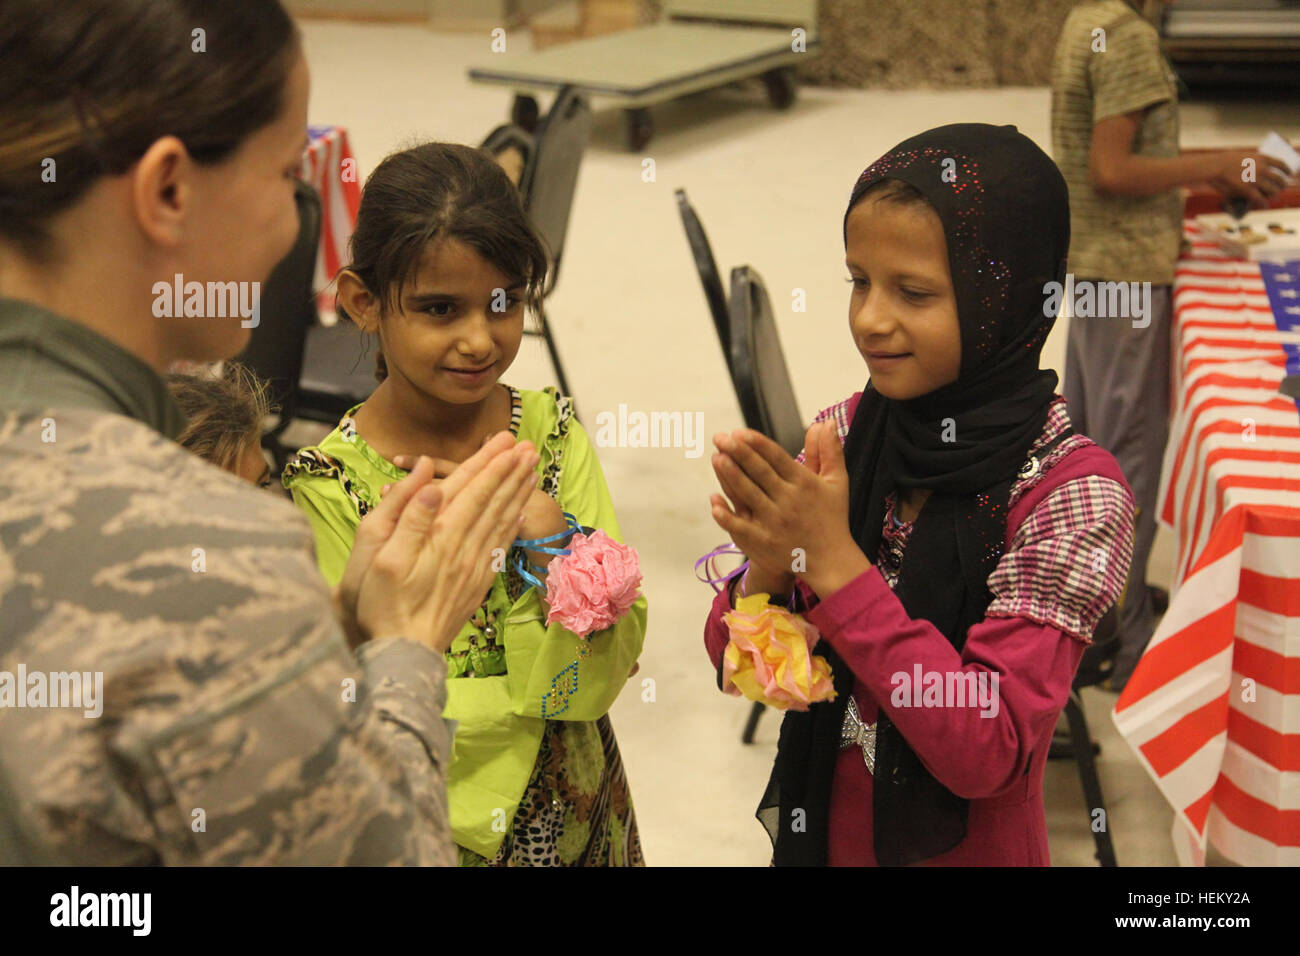 A U.S. Air Force airman teaches a young Iraqi girl how to play 'patty cake' during Iraqi Kids' Day at Joint Base Balad in Salah Aldin province, Iraq, Oct. 1, 2011. The purpose of Iraqi Kids' Day is to build positive relations with Iraqi children, let them know that the U.S. forces in Iraq are friendly and are here to help the well-being of Iraq's citizens. All these soldiers and airmen are in Iraq in support of Operation New Dawn. (Photo by Pfc. Nikko-Angelo Matos) Iraqi Kids' Day 111001-A-YV529-060 Stock Photo